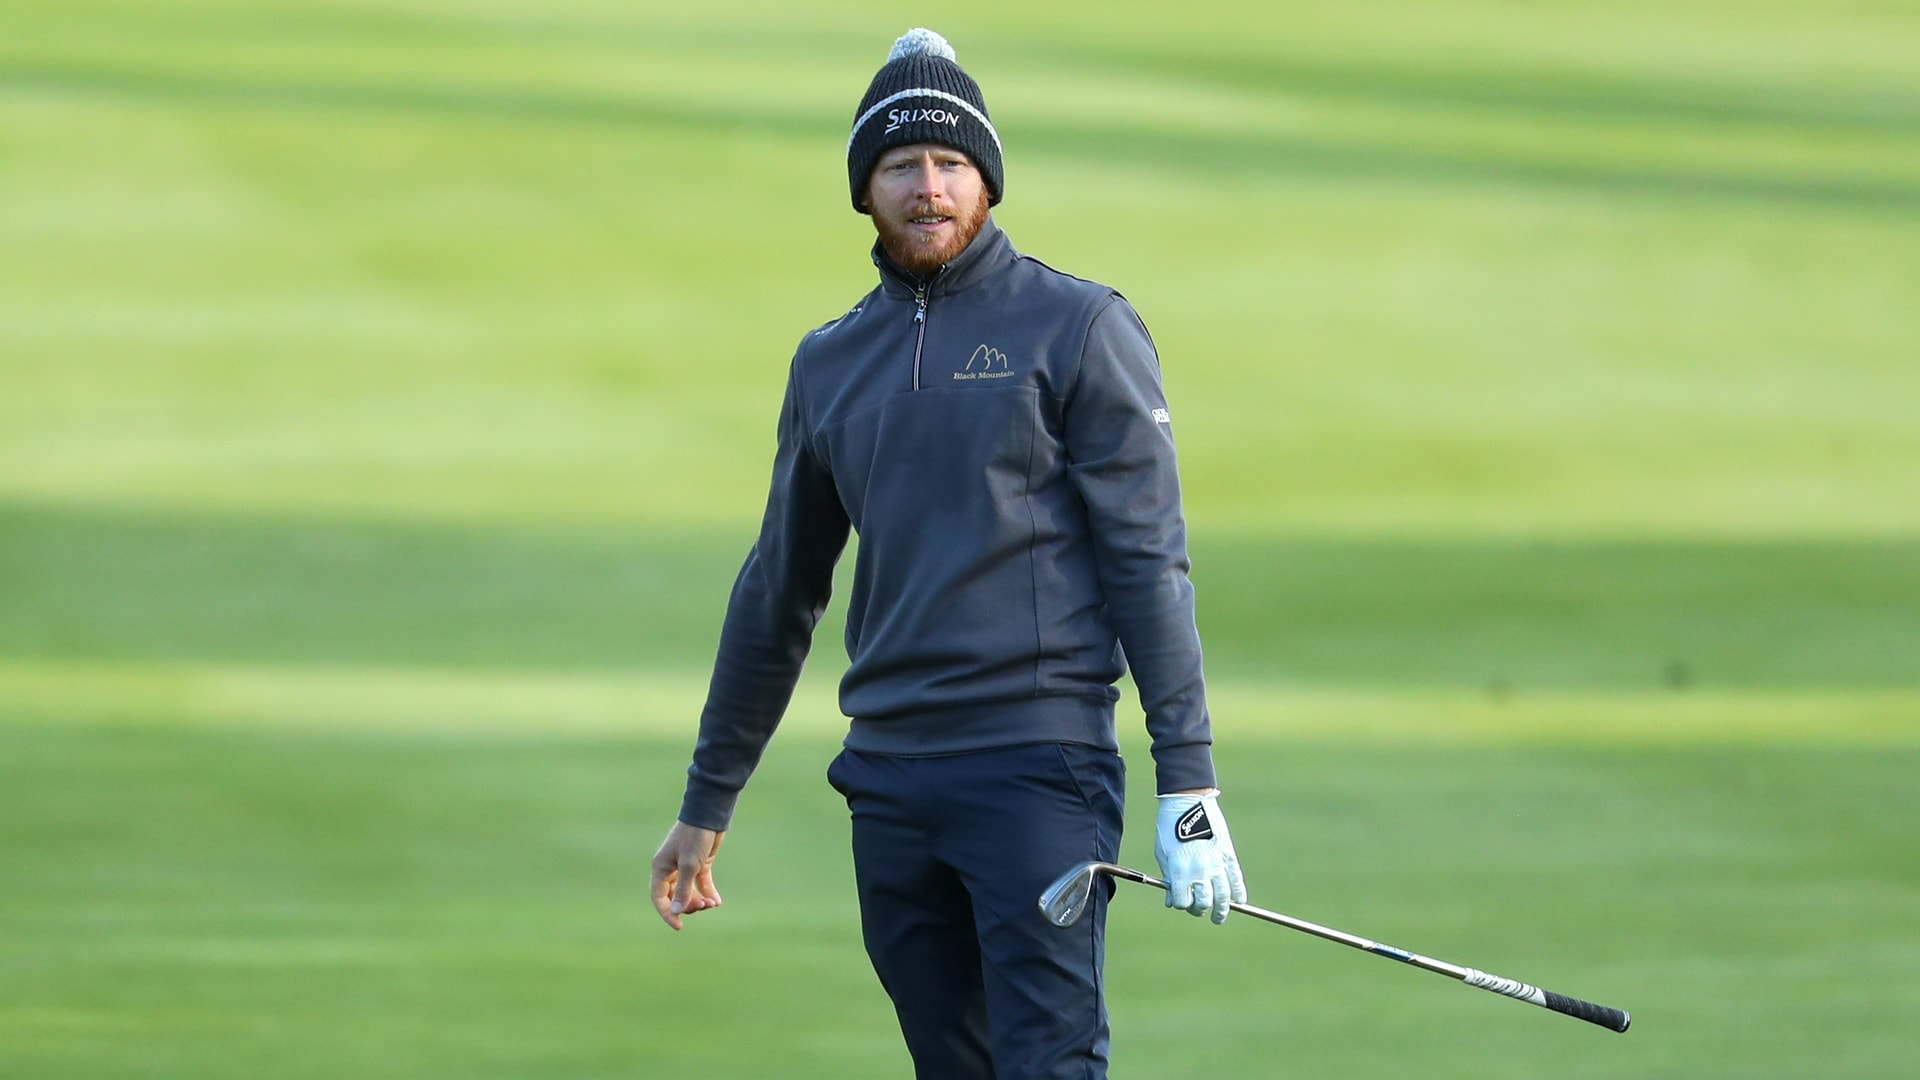 Sebastian Soderberg forced to withdraw from Irish Open because of contact tracing